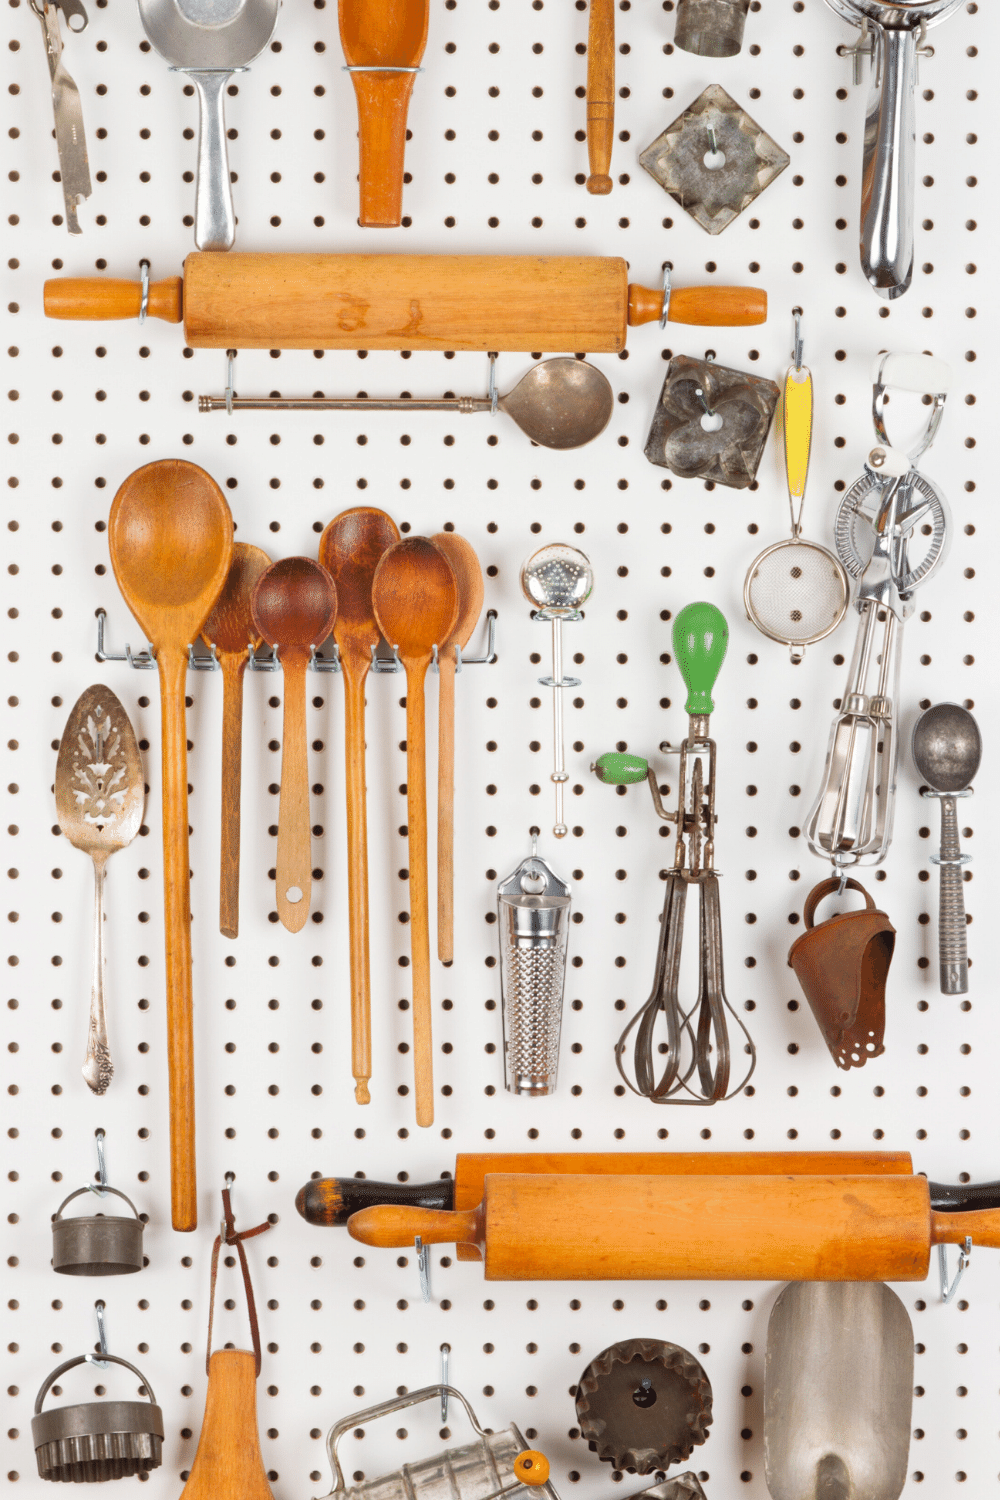 Kitchen Gadgets on Pegboard